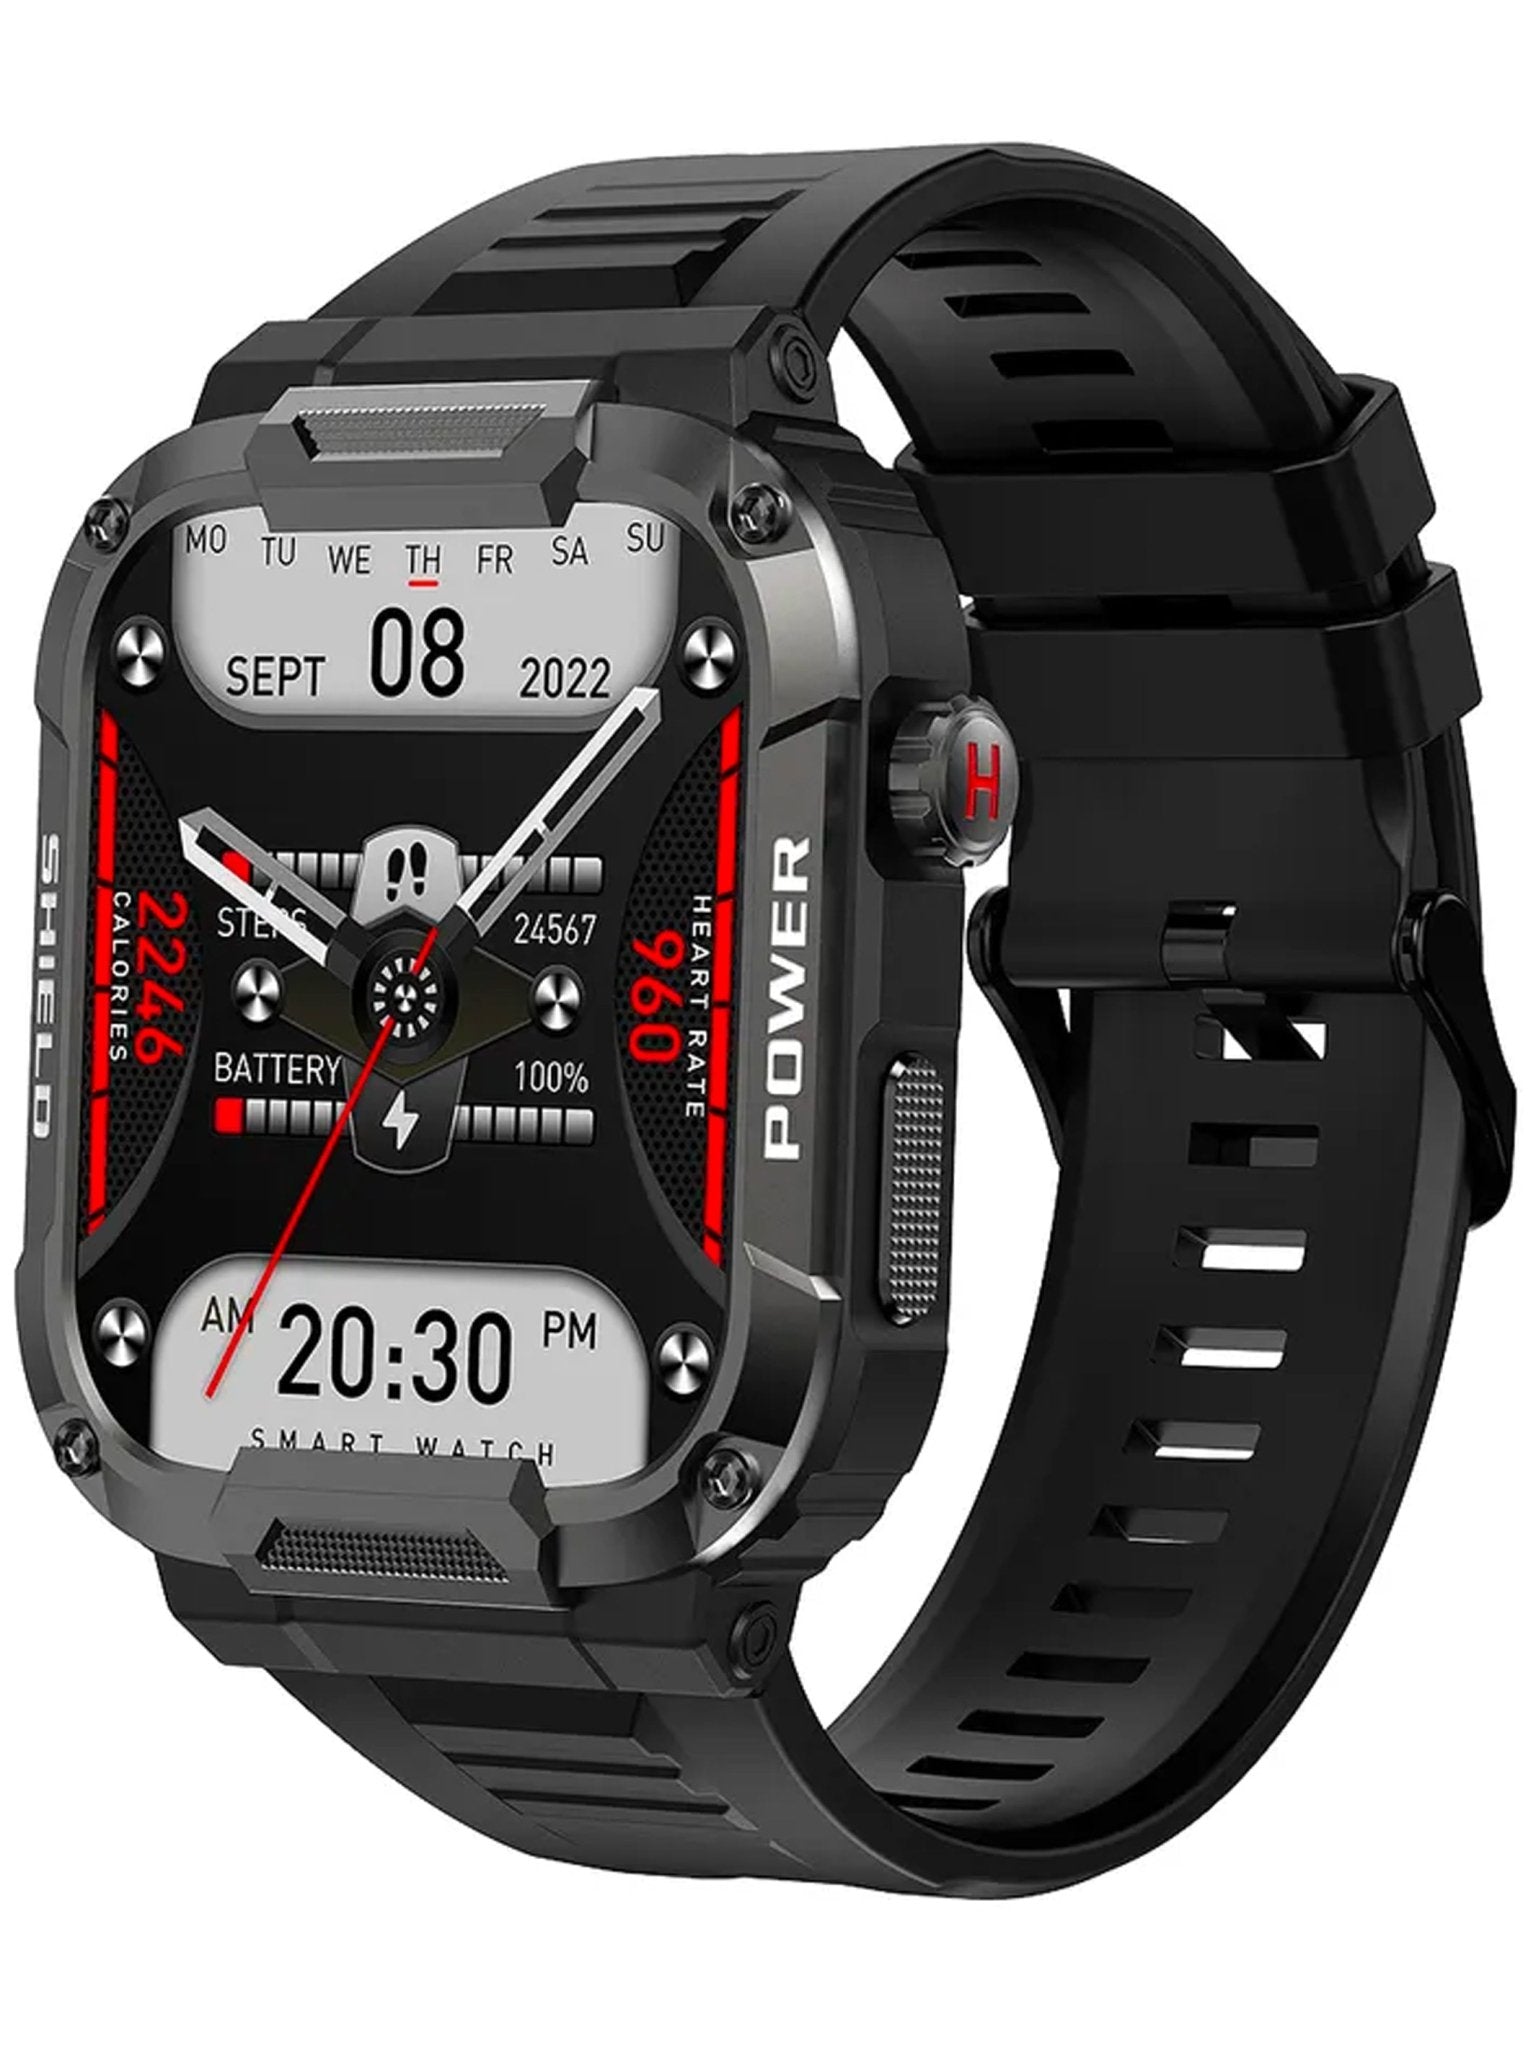 4elementsclothingTelsaTELSA UK - Smart Watch Waterproof IP68 military style mens Sports & fitness digital Watch with Touch Screen display, Fitness Watch, Heart Rate, Step counter Smart Watch for men IOS & AndroidWatch5060976970320